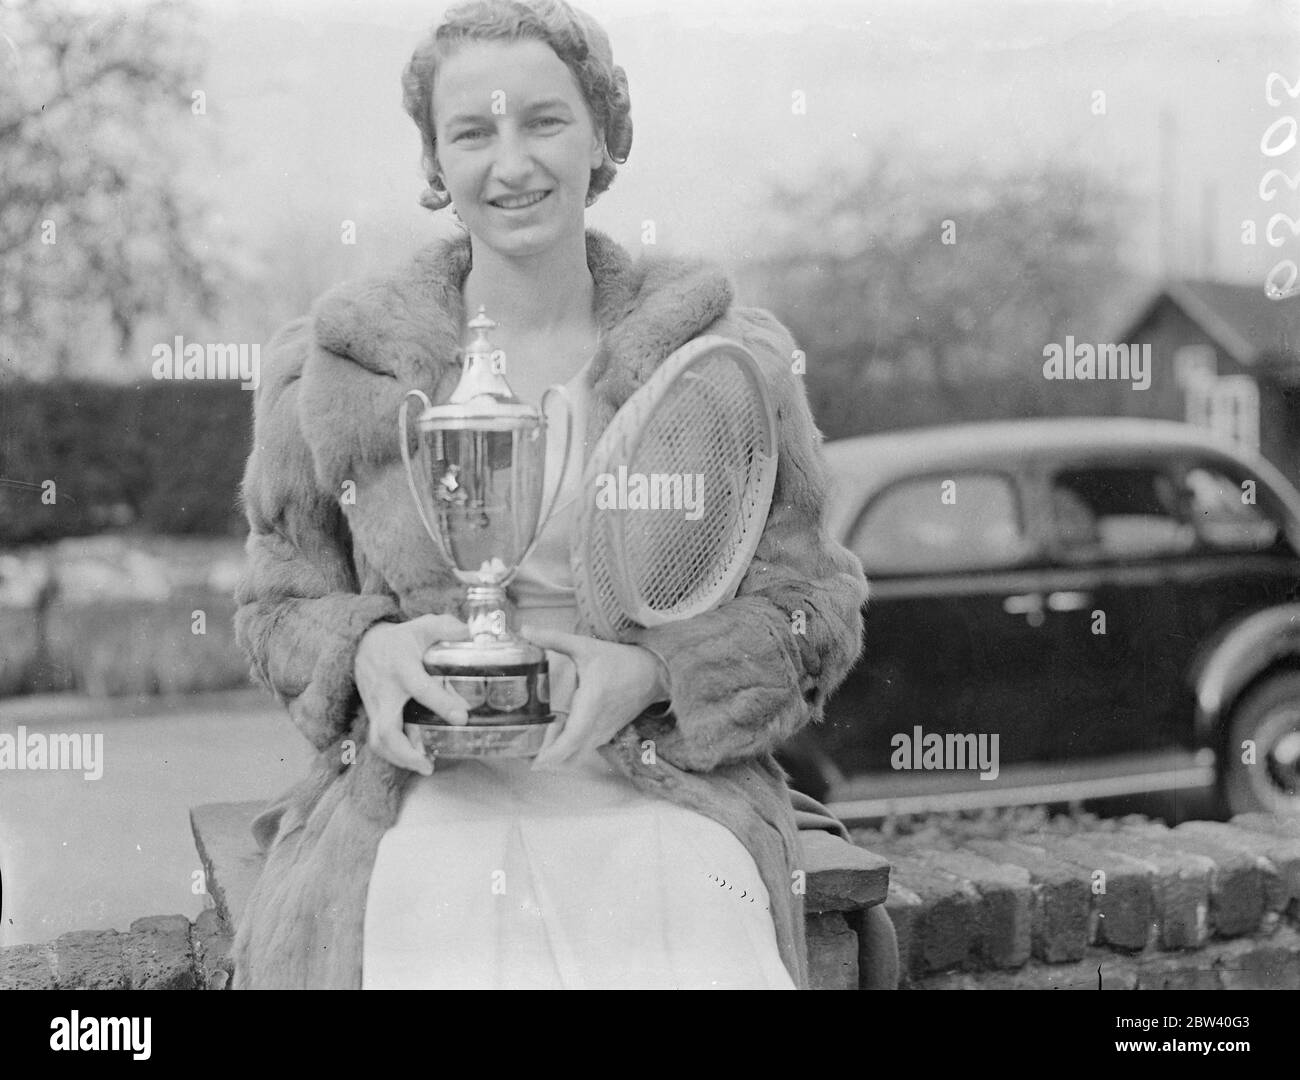 Mary Hardwick wins title in Roehampton tournament. Kay Stammers in car smash before match . Although she had been involved in a car smash on her way to the match , Miss Kay Stammers played Miss Mary Hardwick in the final of the Roehampton Holocaust tennis Championships but was beaten 8 - 6 , 7 - 5 . Photo shows , Mary Hardwick with the cup . 10 April 1937 Stock Photo